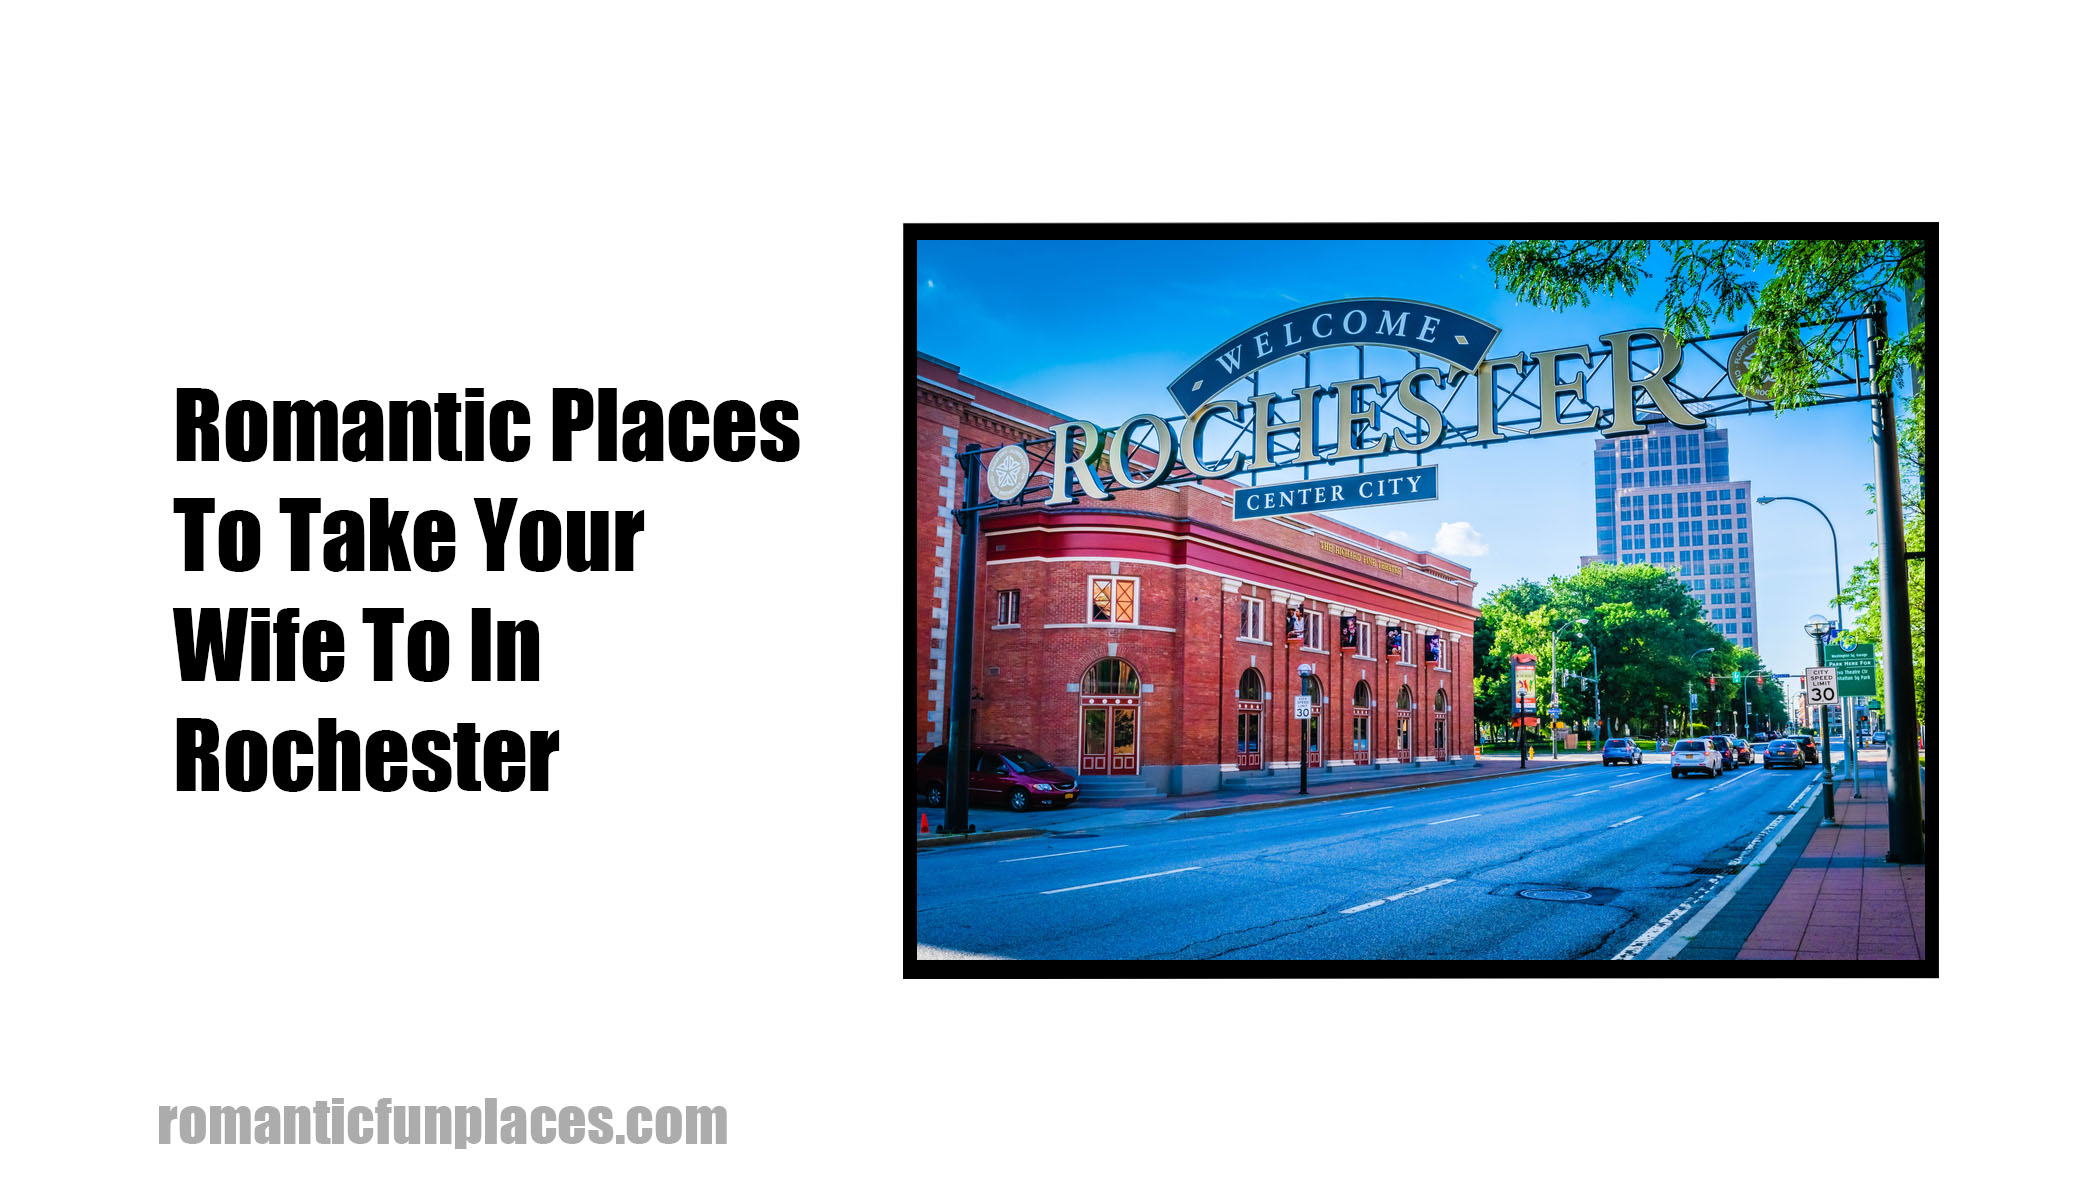 Romantic Places To Take Your Wife To In Rochester